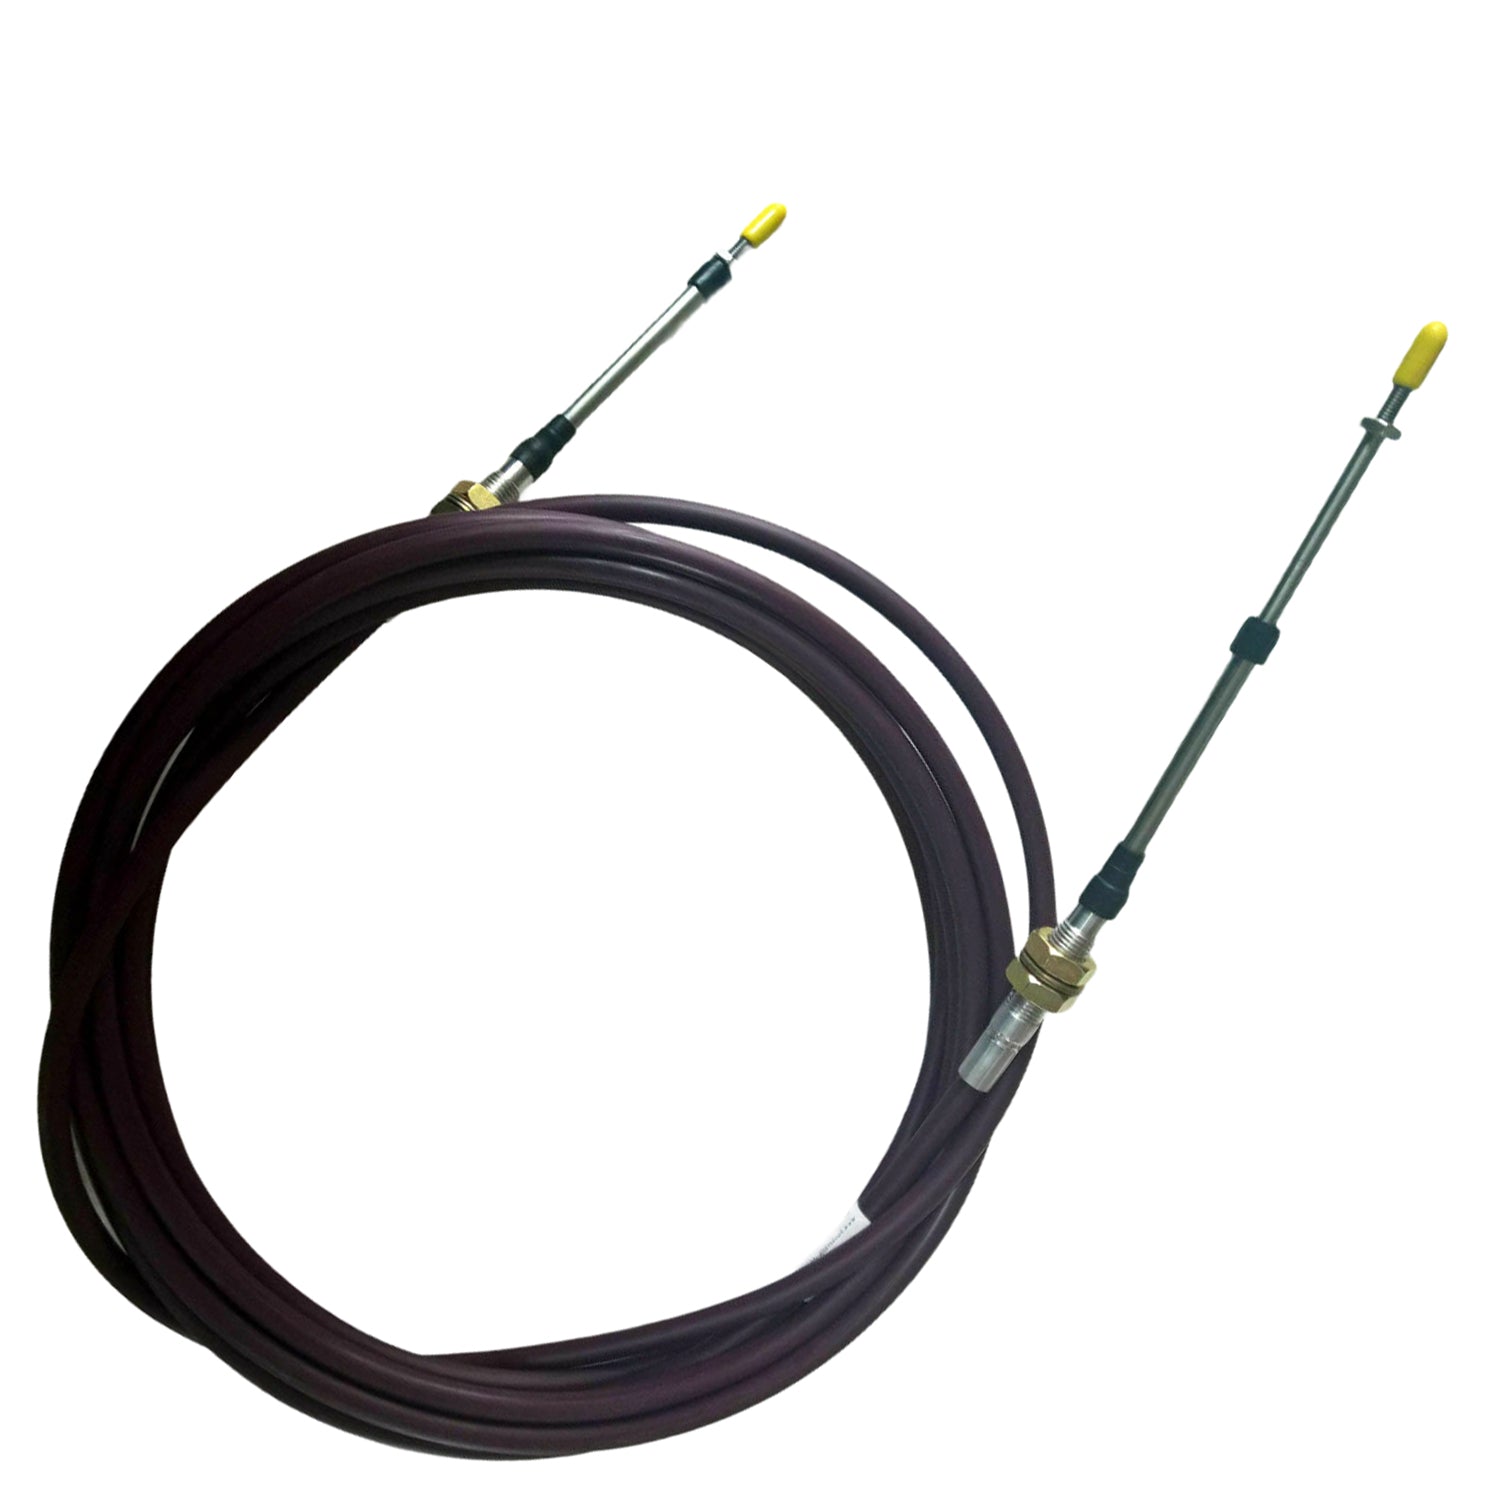 Duraforce 7159993, Throttle Cable For Bobcat